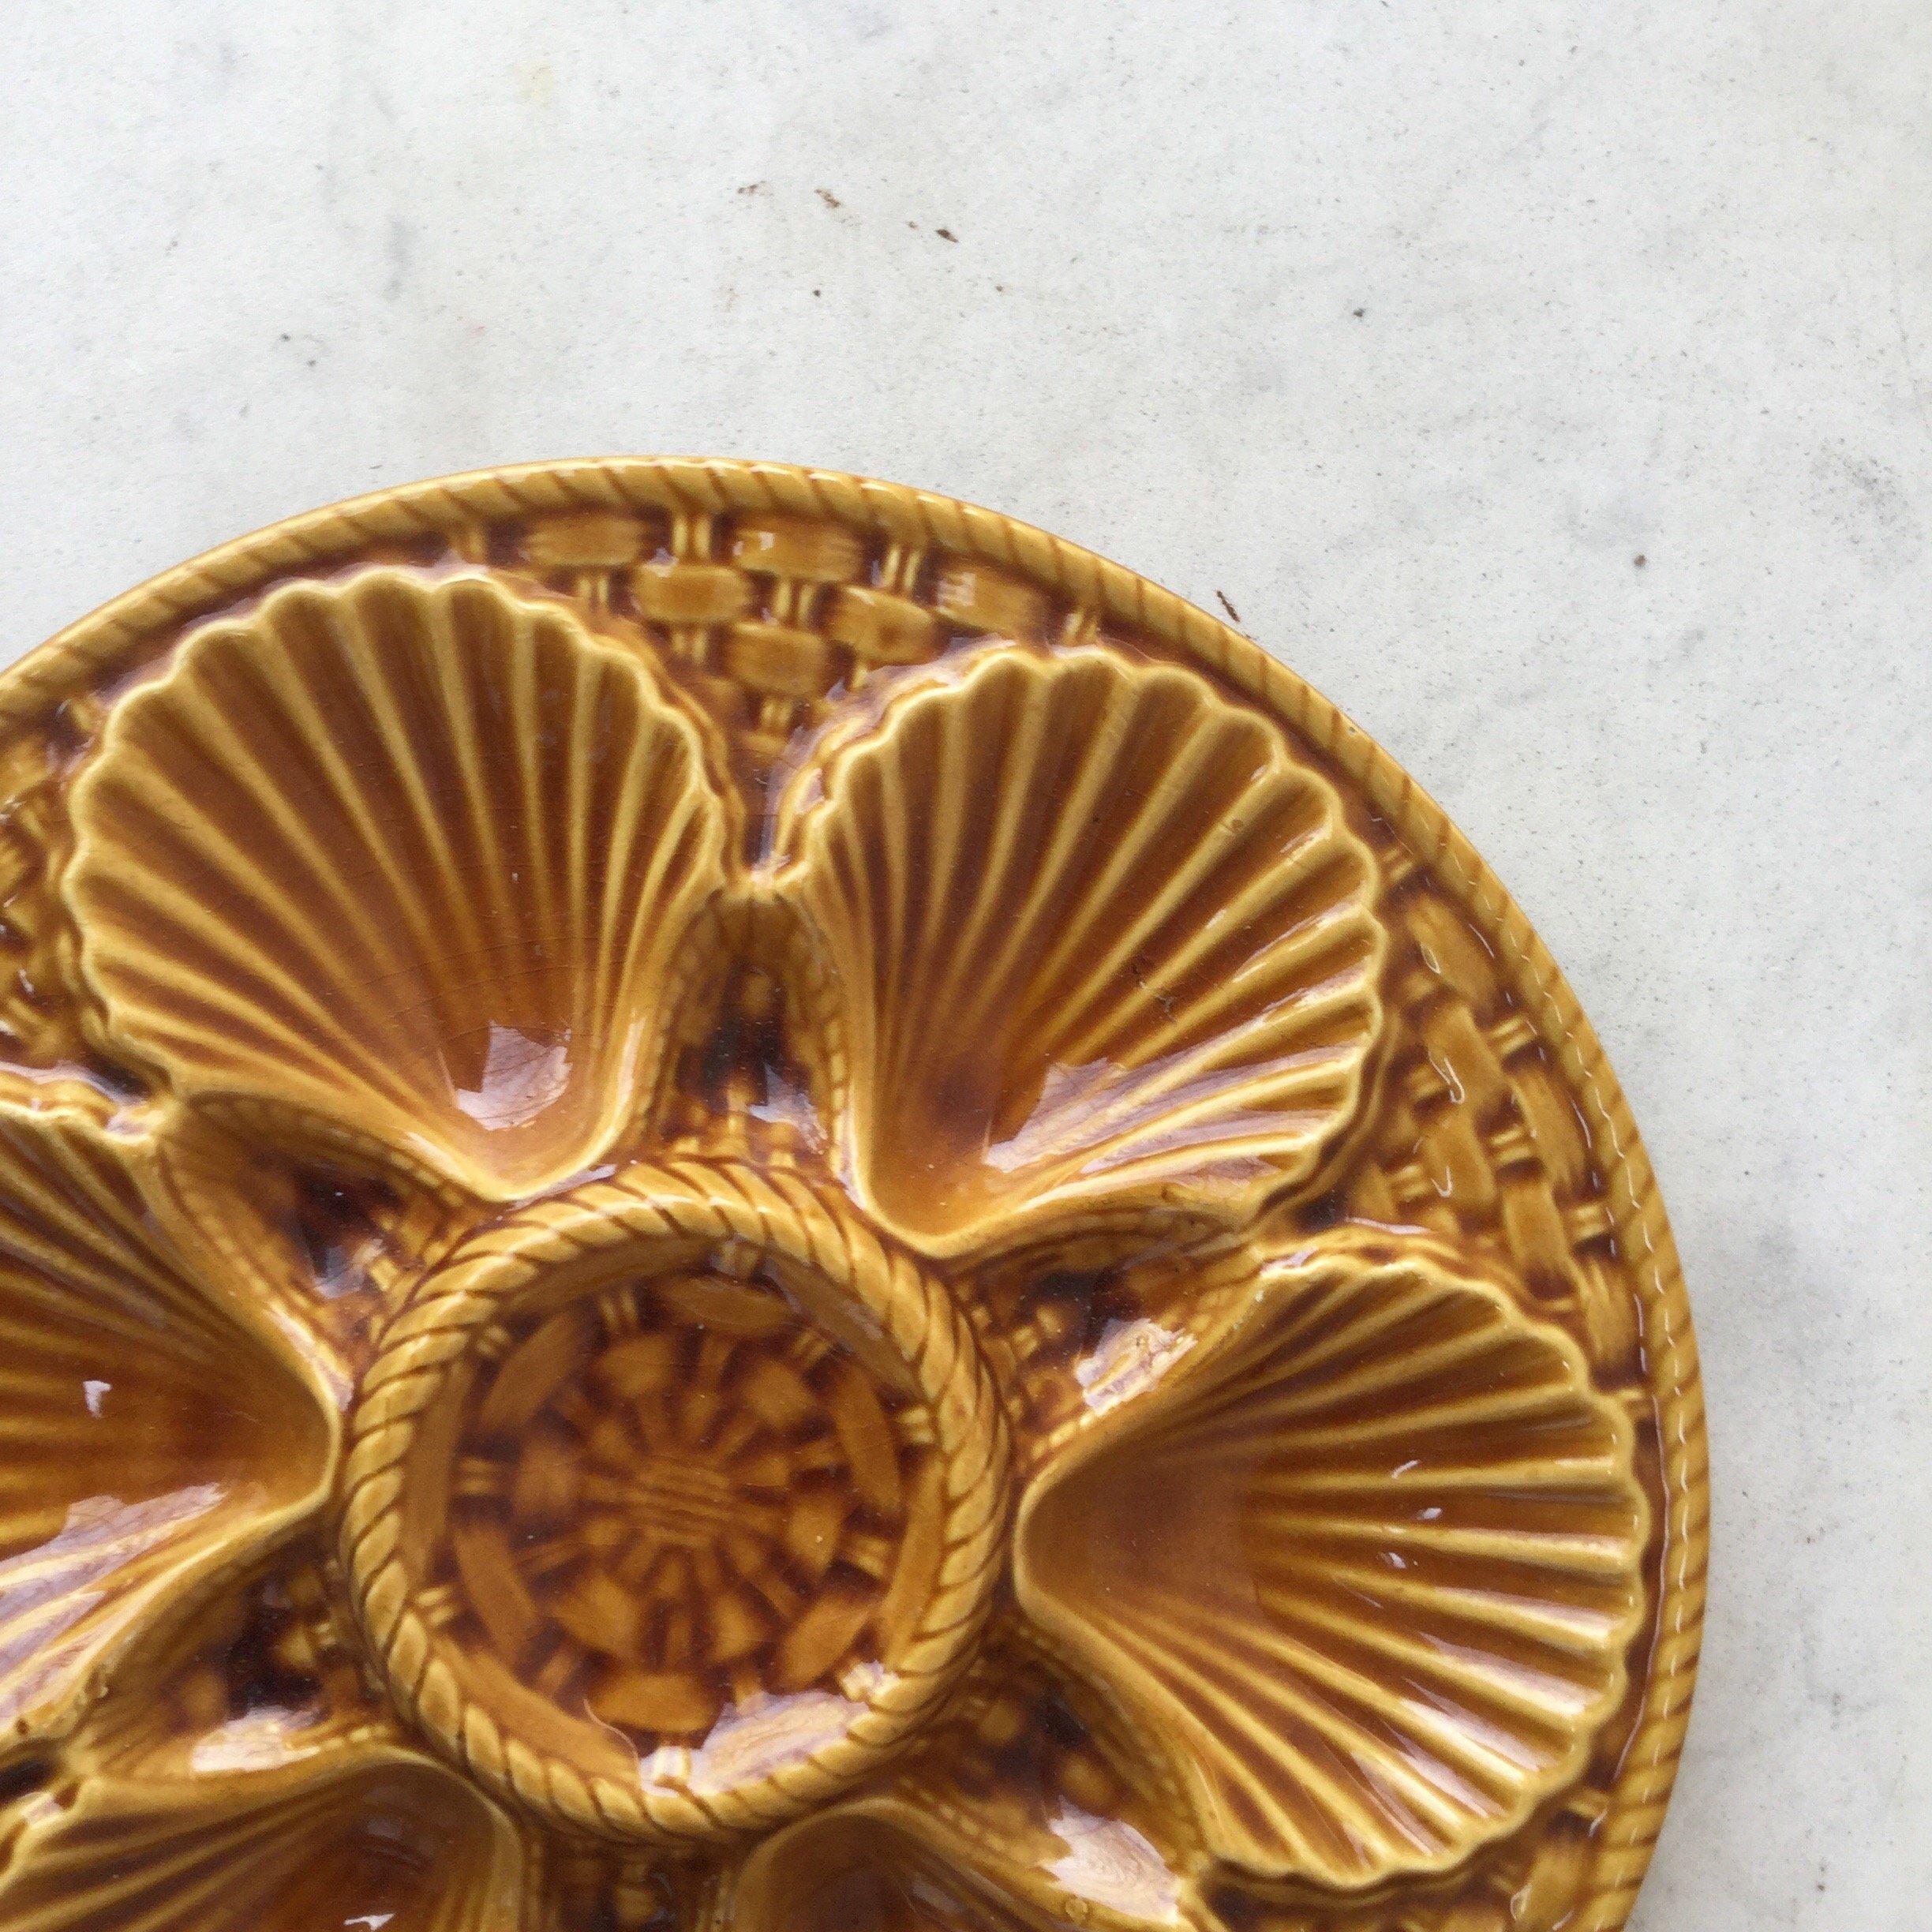 Yellow Majolica oyster plate longchamp, circa 1950.
11 plates available.